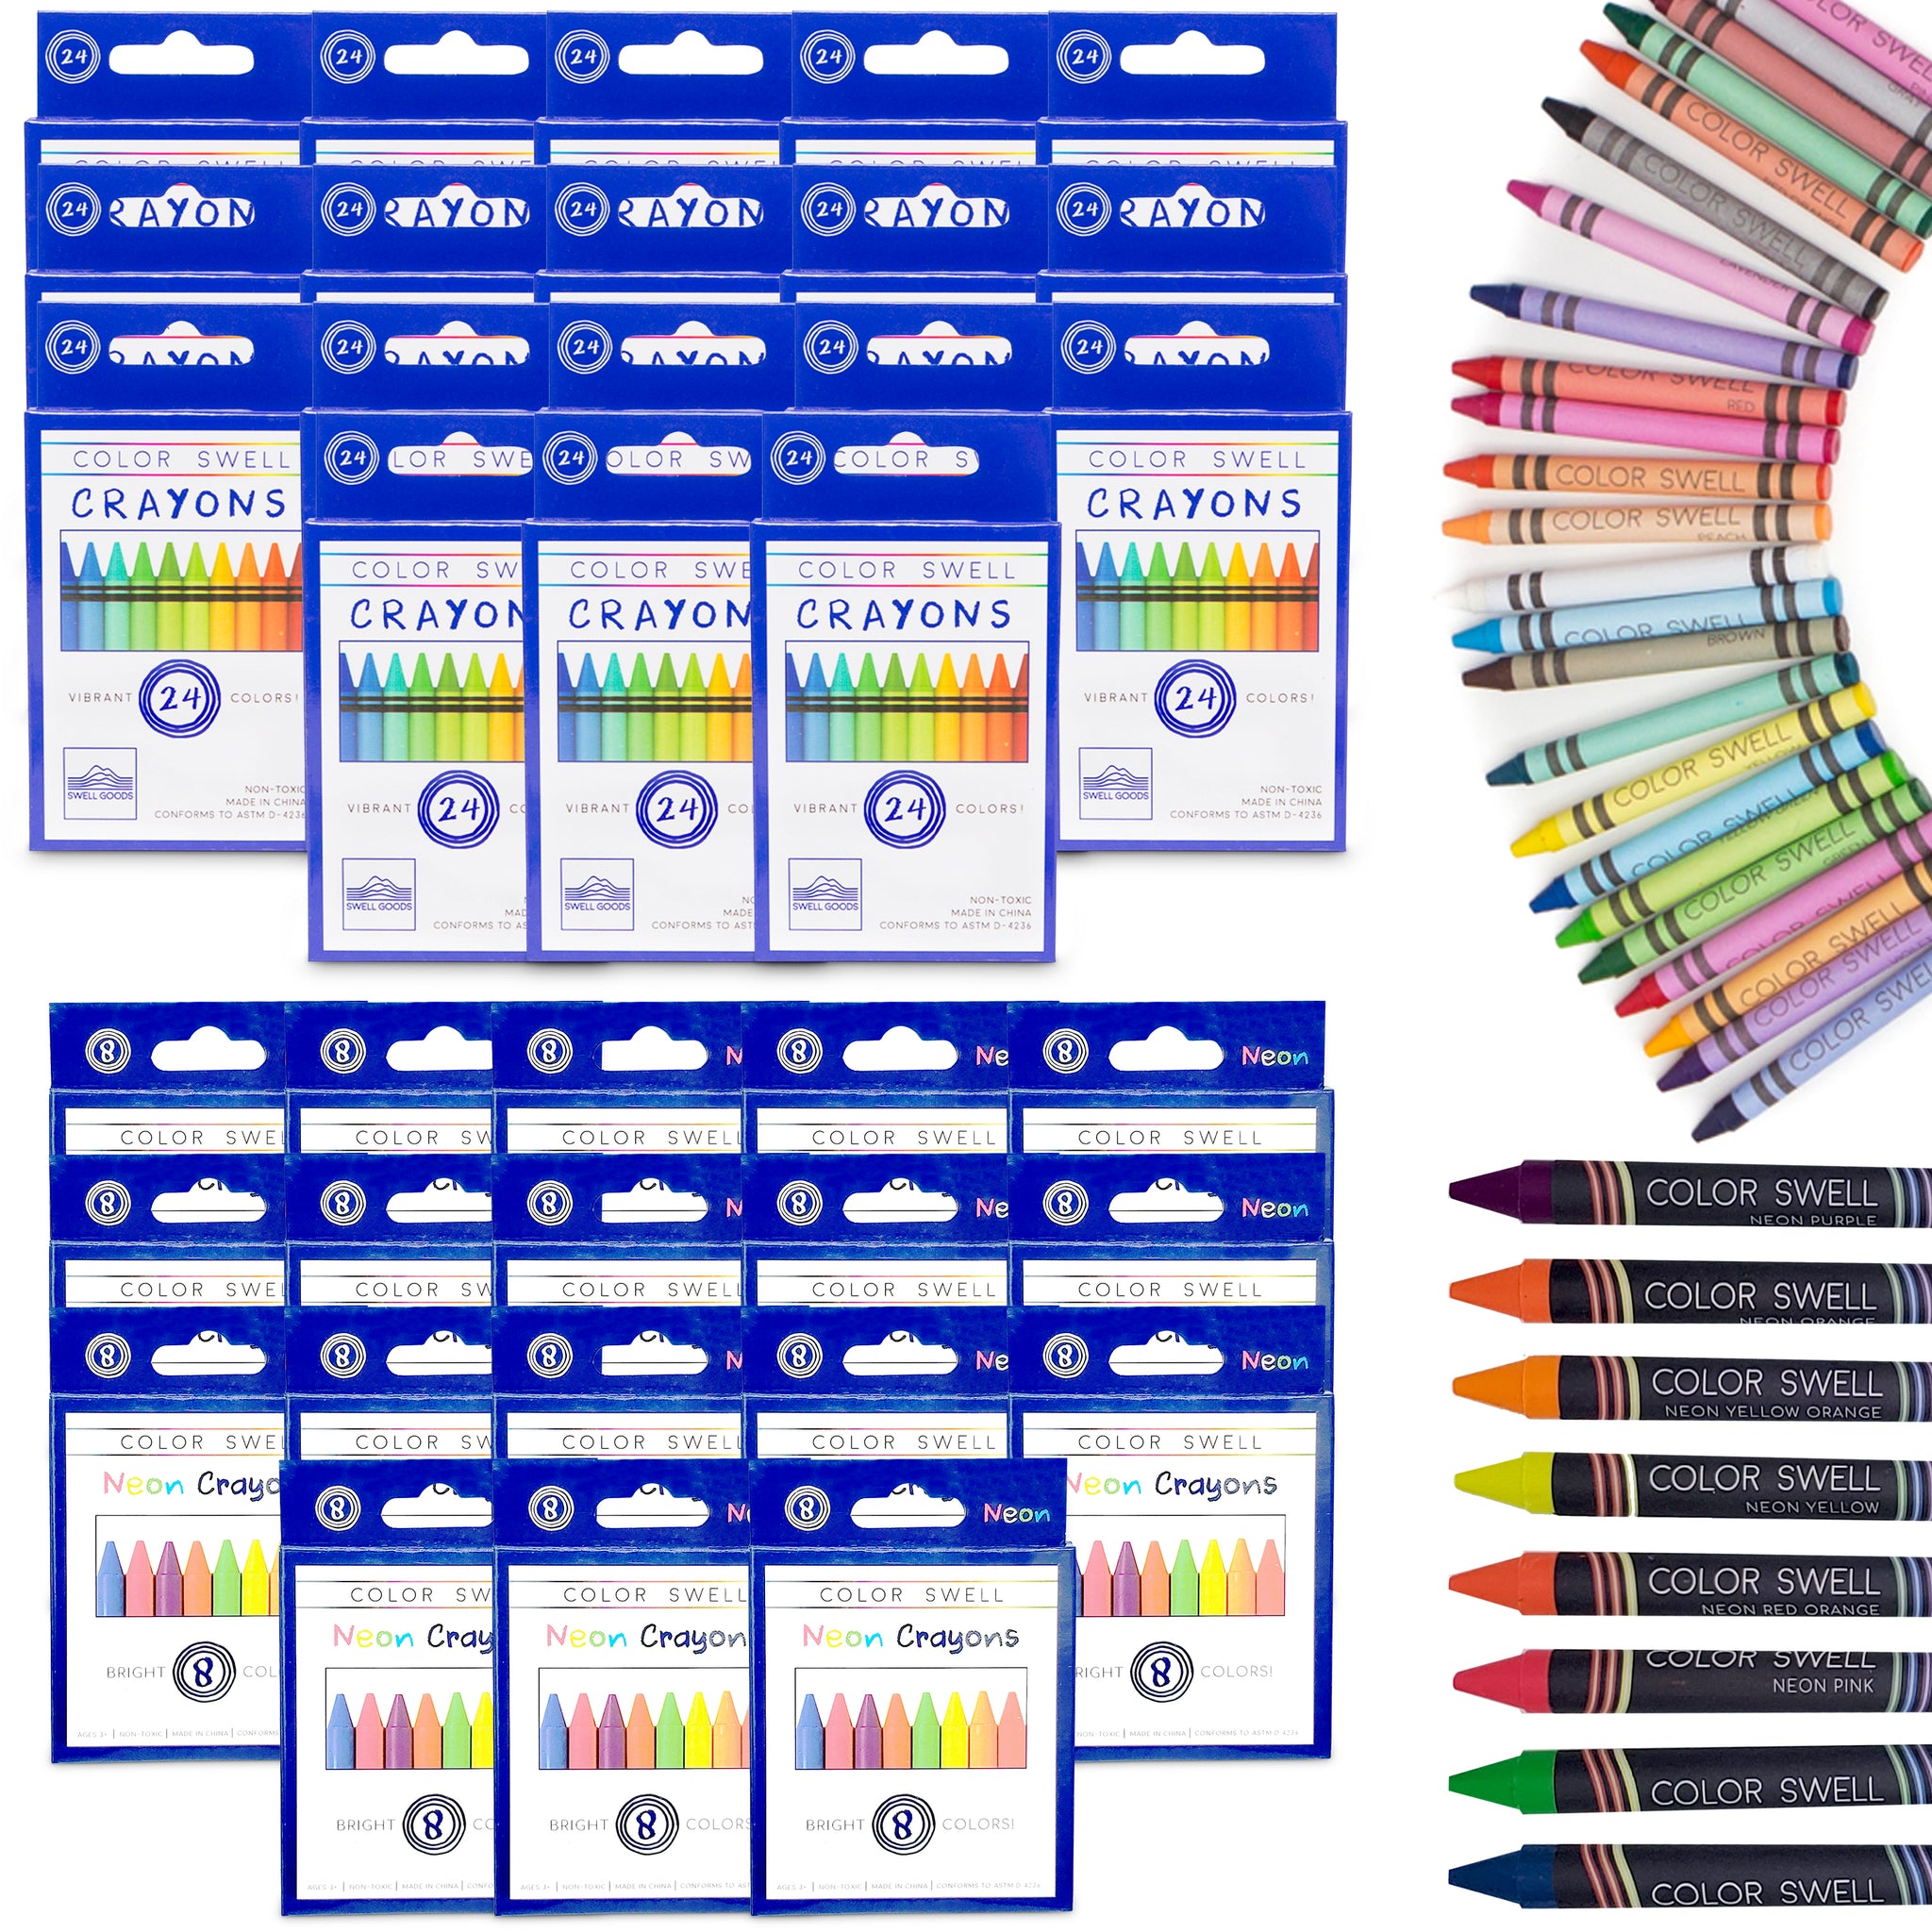 Color Swell Bulk Crayon Packs - 18 Packs Large Neon Crayons and 18 Pac